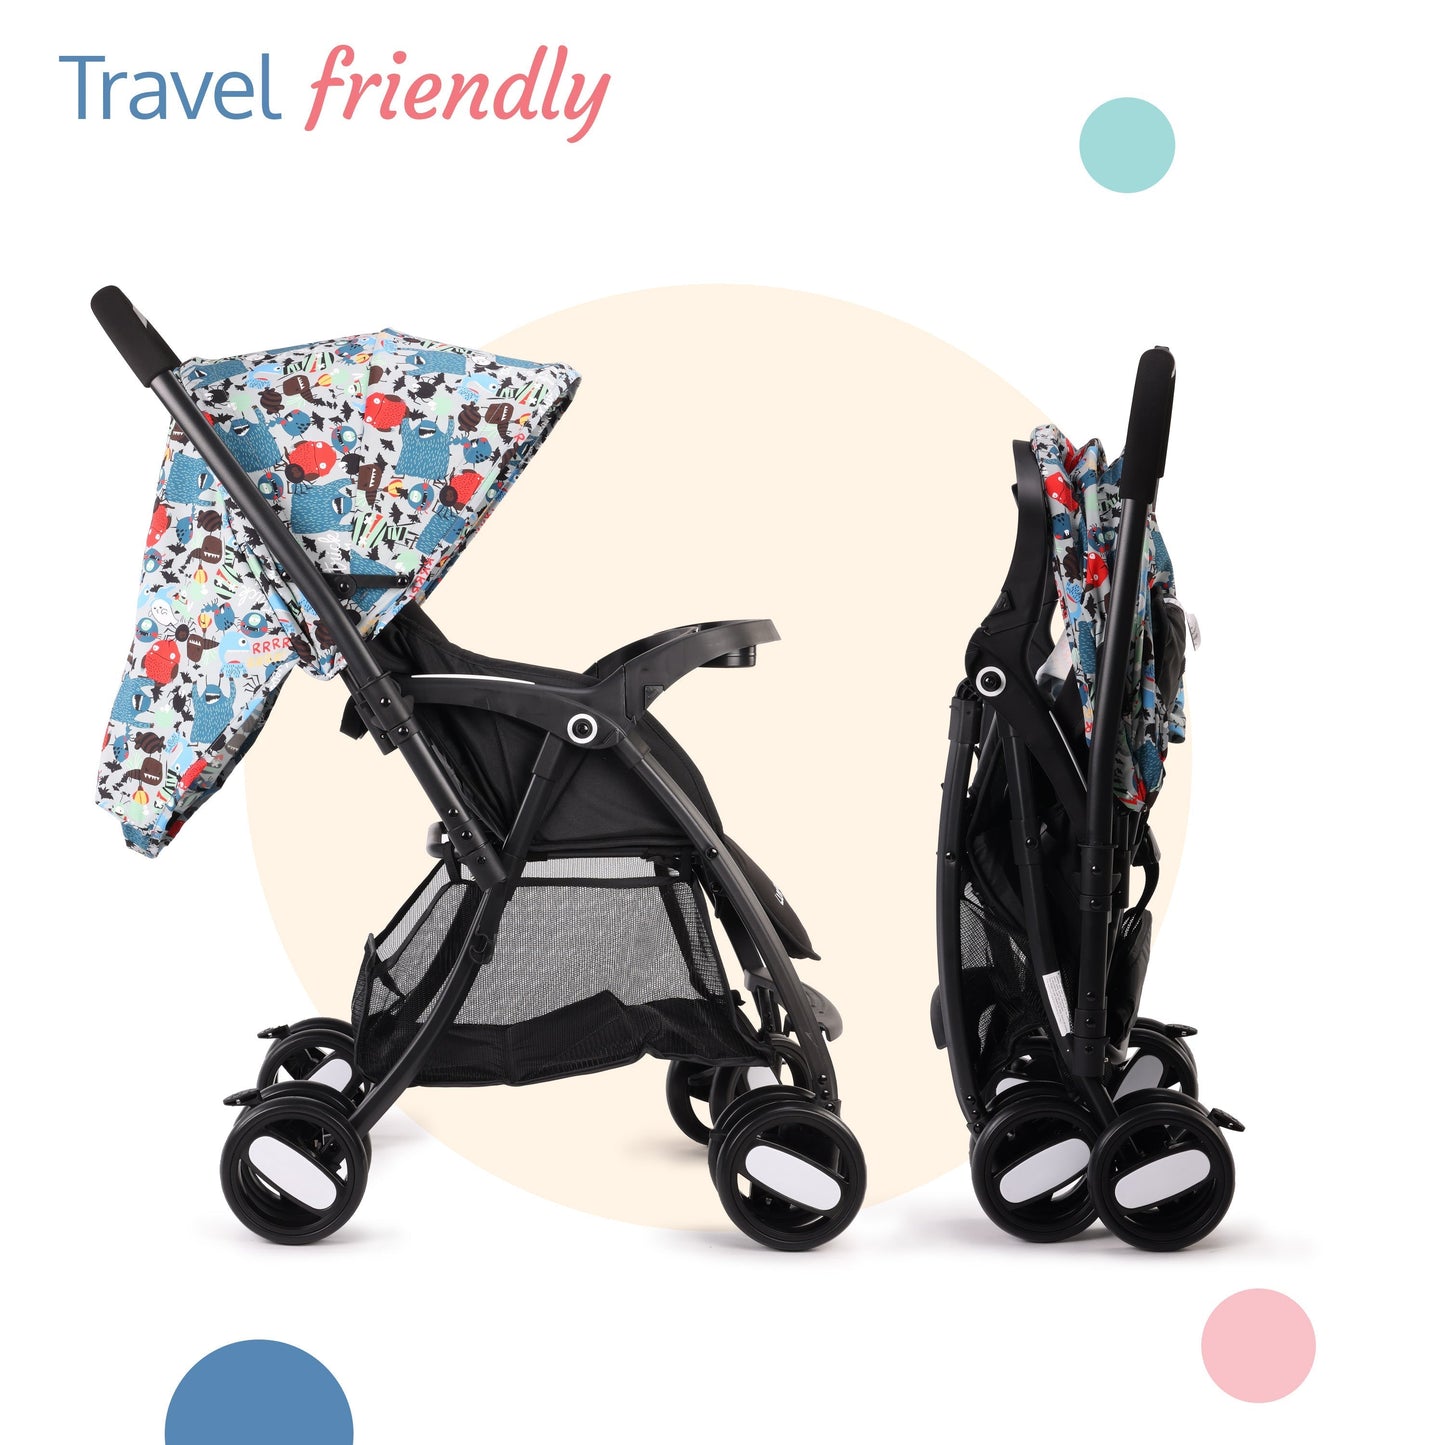 Golf Baby Stroller/Pram with 5 Point Safety Harness, Multi Level Recline & Adjustable footrest, Extendable Canopy, Blue Printed